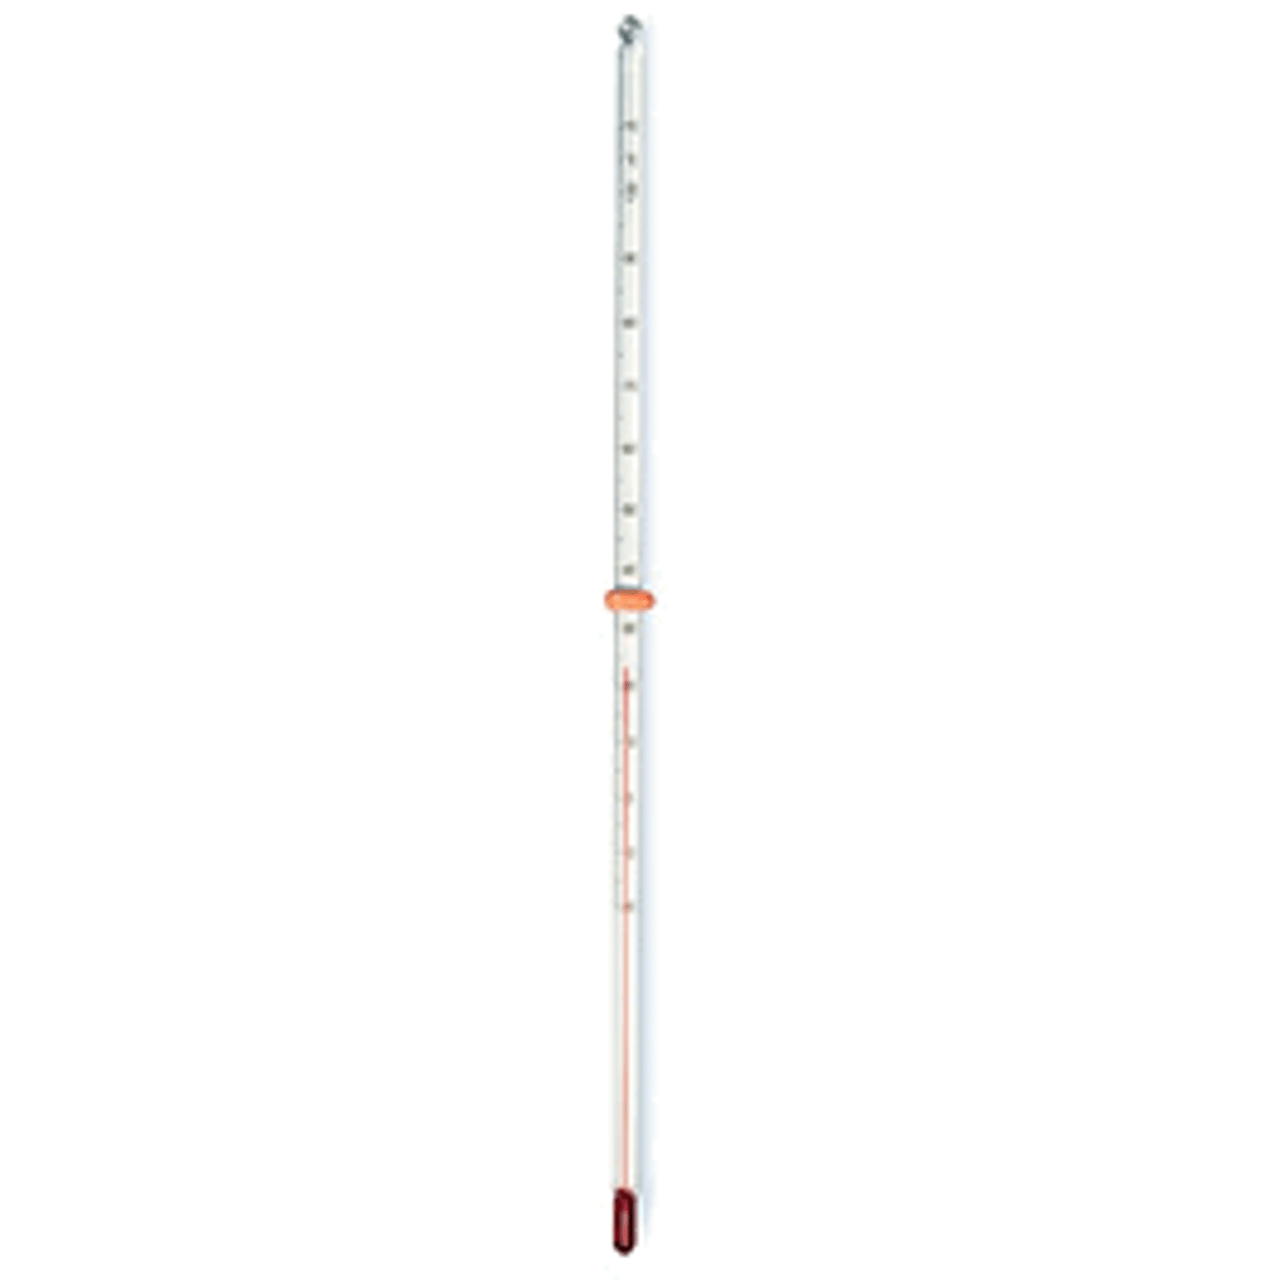 Wholesale thermometer 1000 degree For Effective Temperature Measurement 